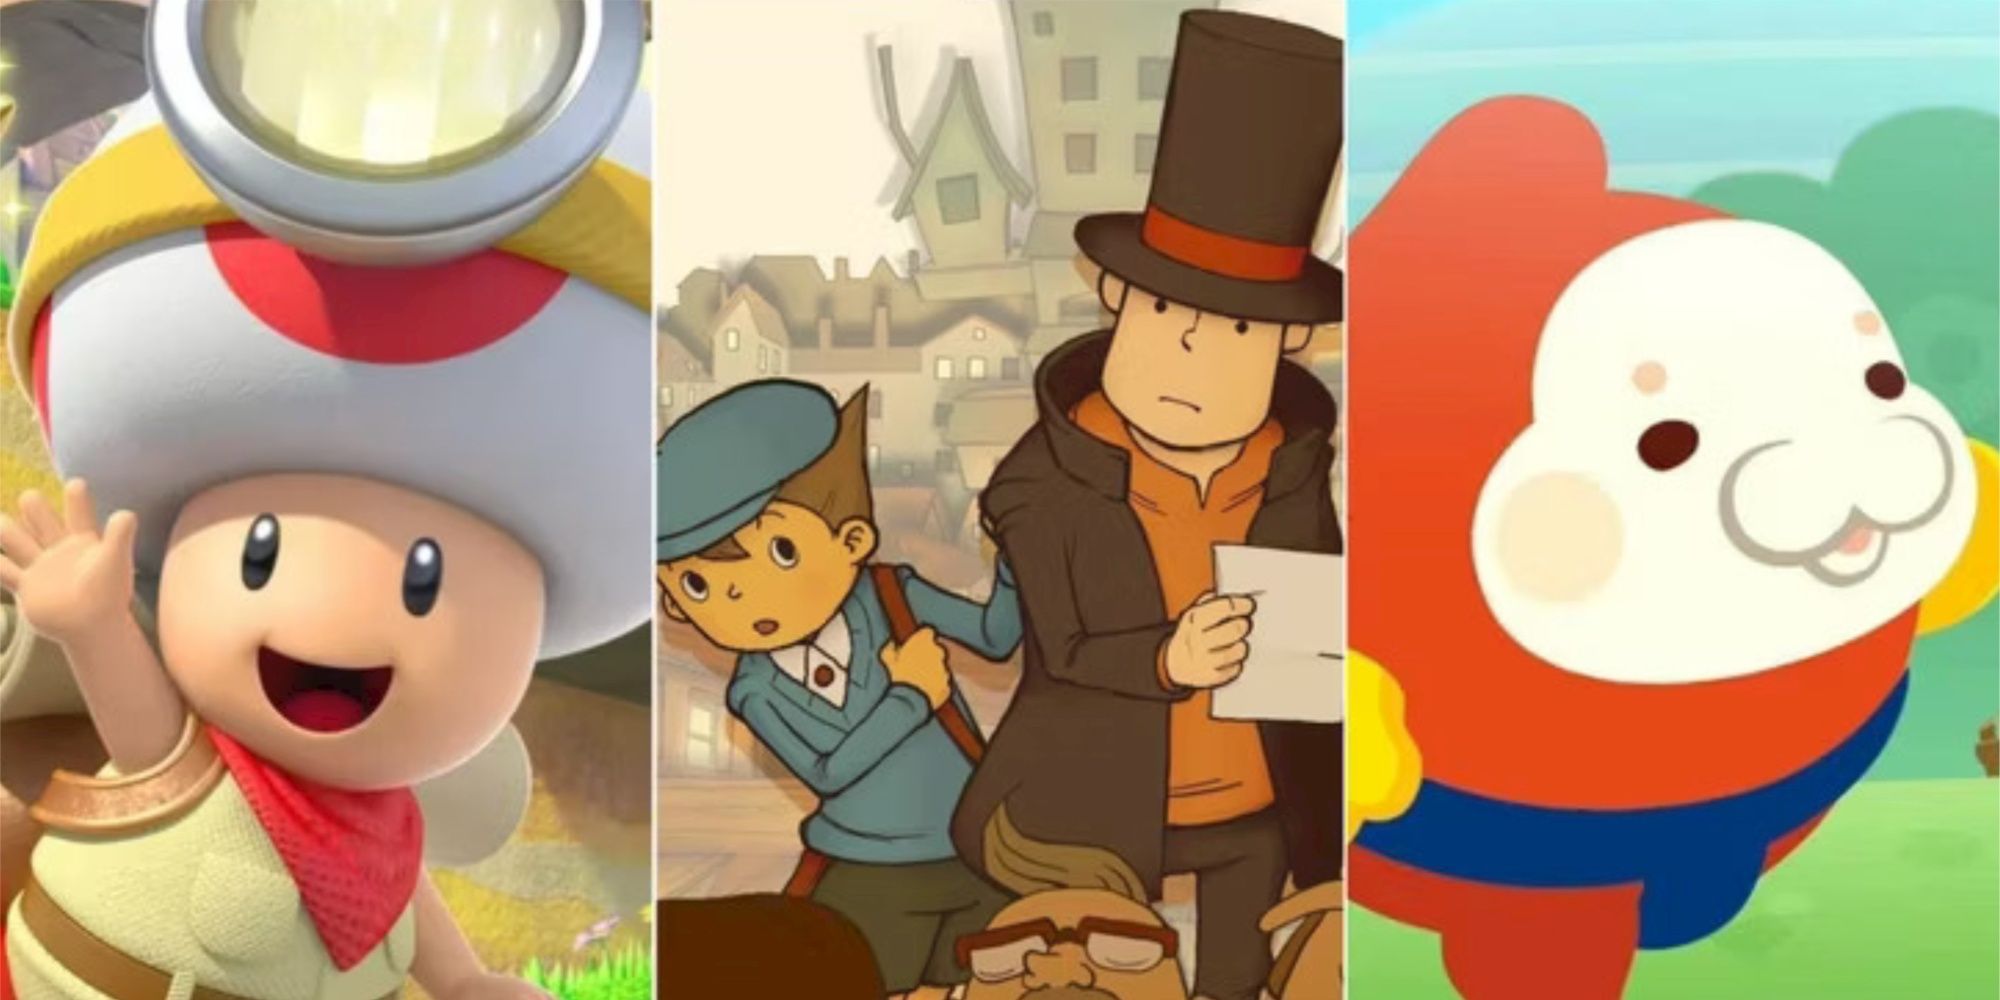 Split images of Captain Toad, Professor Layton, and Pushmo